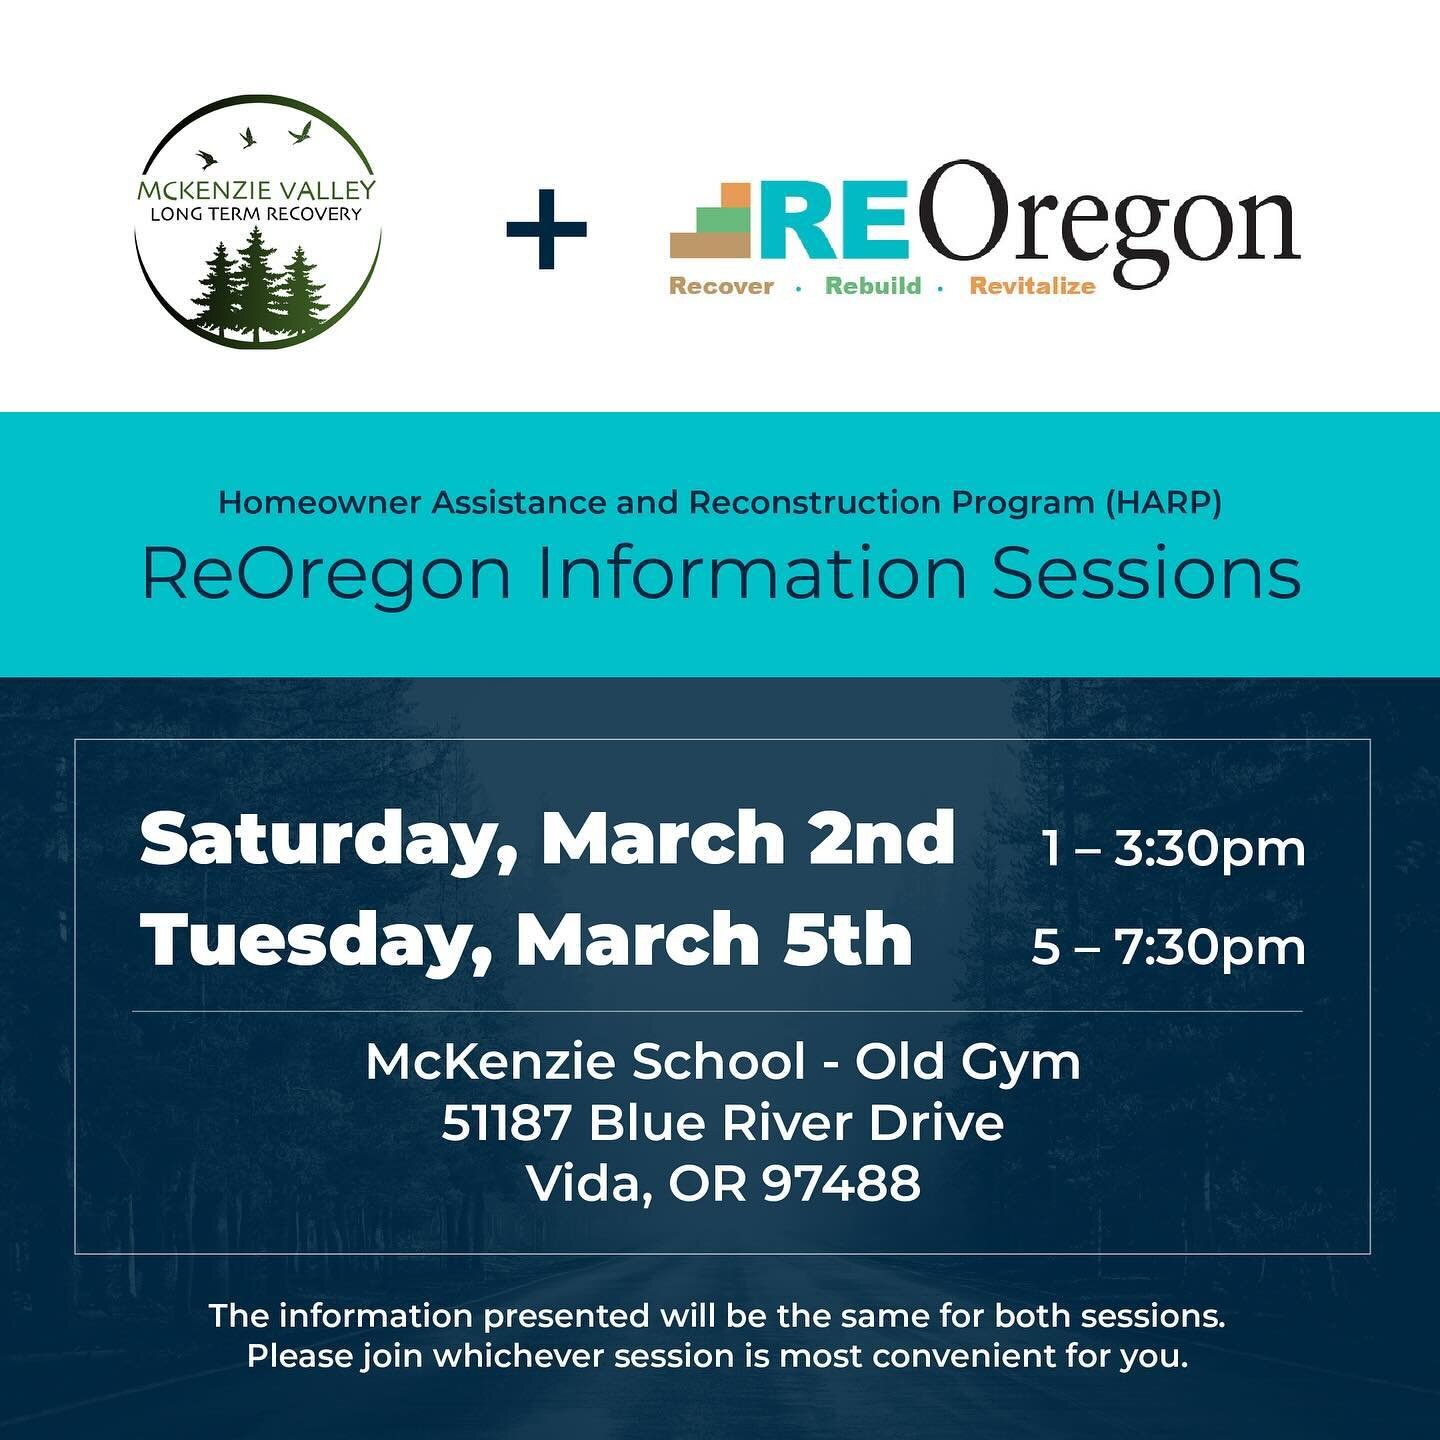 If you were a homeowner at the time of the 2020 Holiday Farm Fire and your primary residence was damaged or destroyed, the ReOregon Homeowner Assistance and Reconstruction Program (HARP) may be able to offer the support you need during these challeng